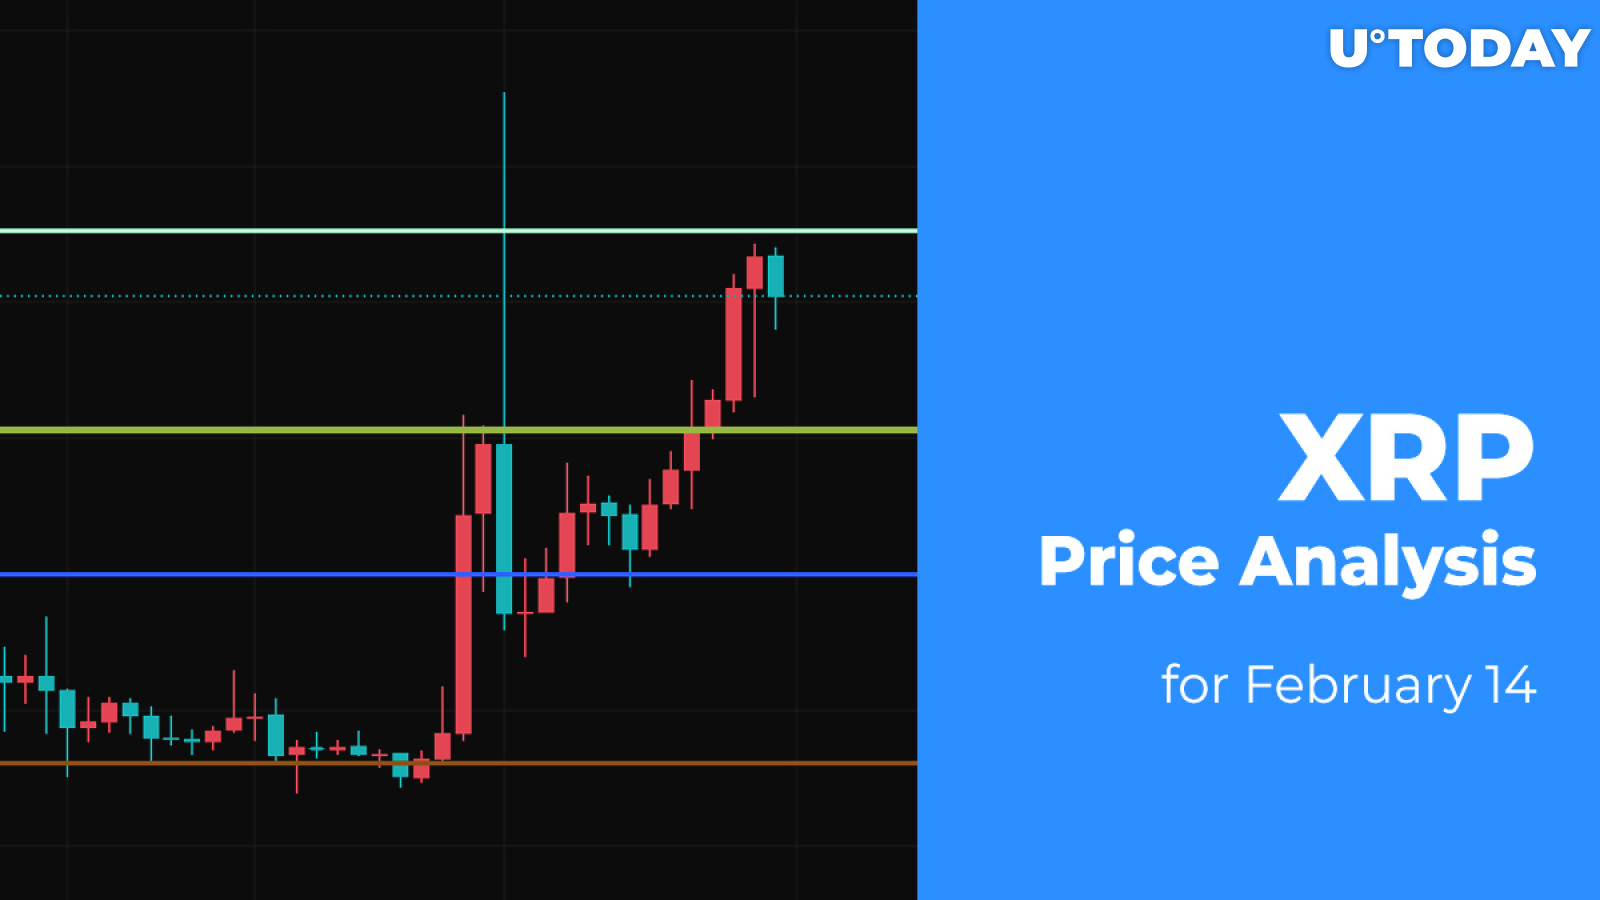 XRP Price Analysis for February 14